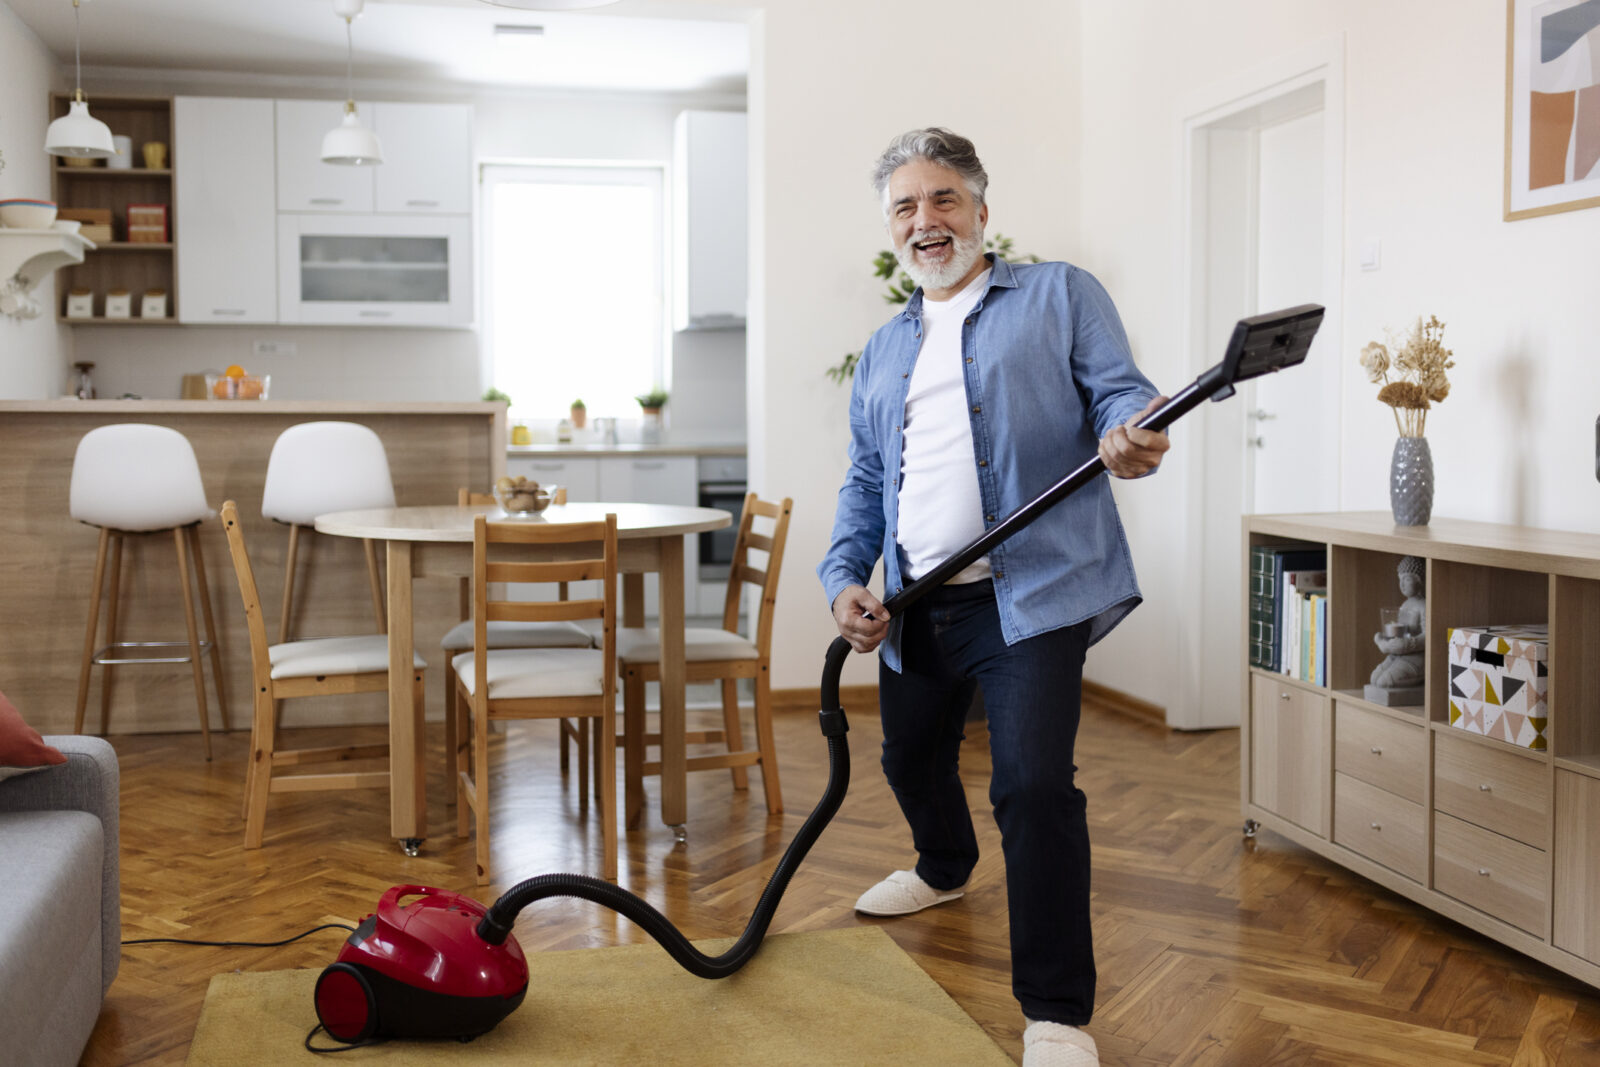 Bearded man dancing happily with a vacuum cleaner, imitating playing the guitar at home